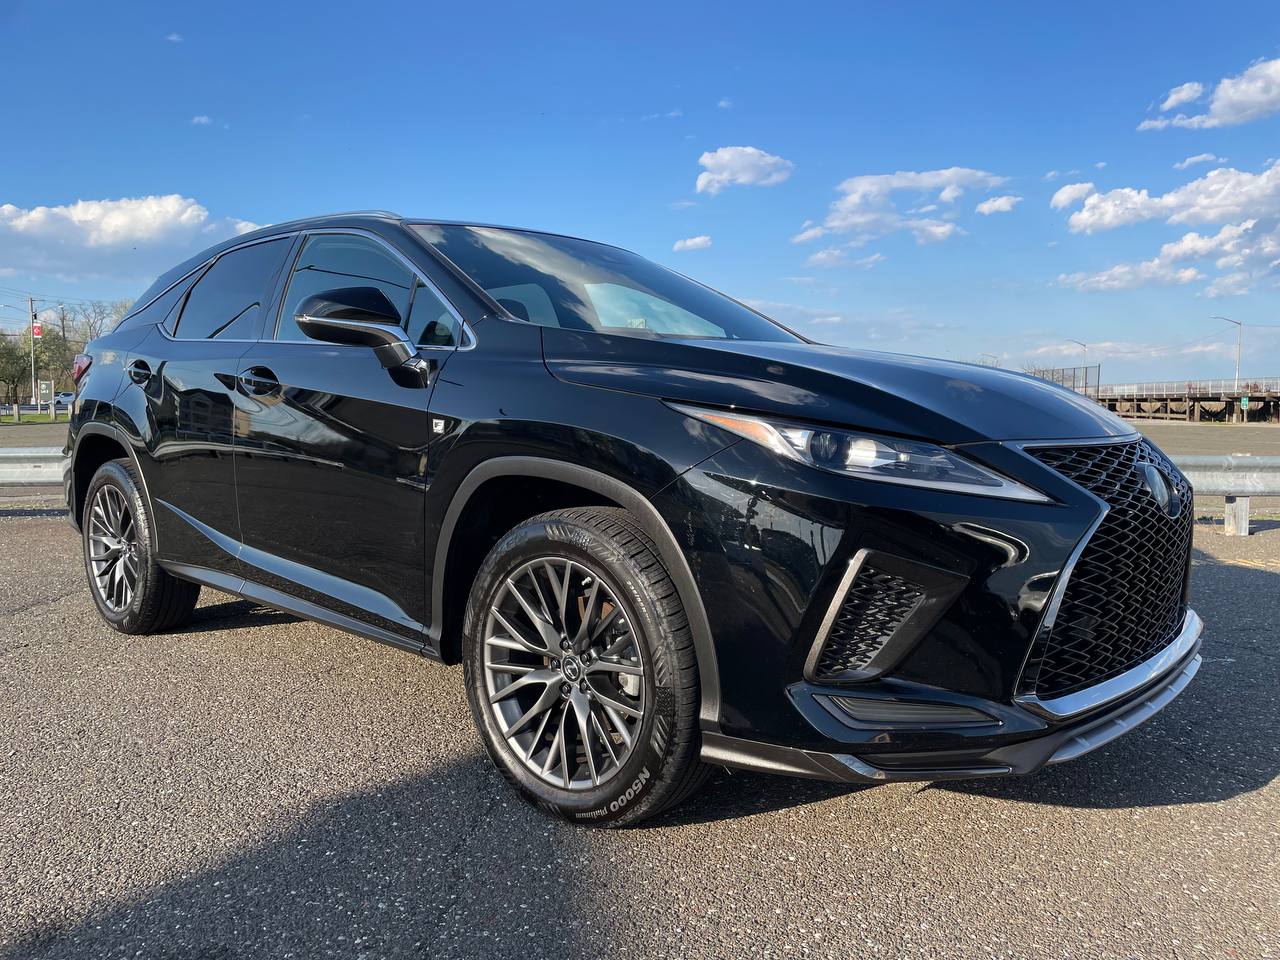 Used - Lexus RX 350 F SPORT SUV for sale in Staten Island NY